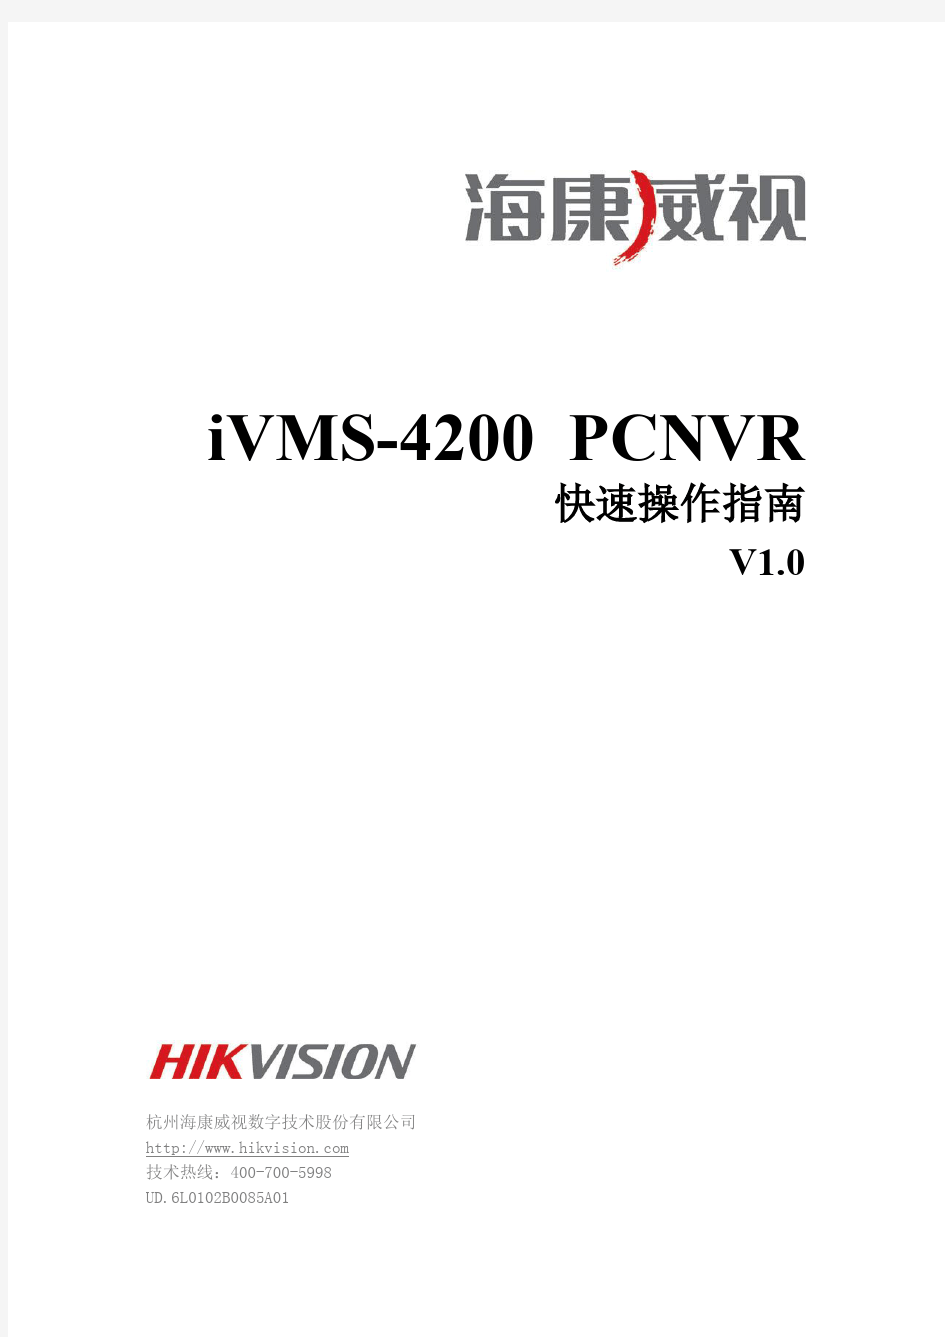 iVMS-4200 PCNVR Quick Start Guide